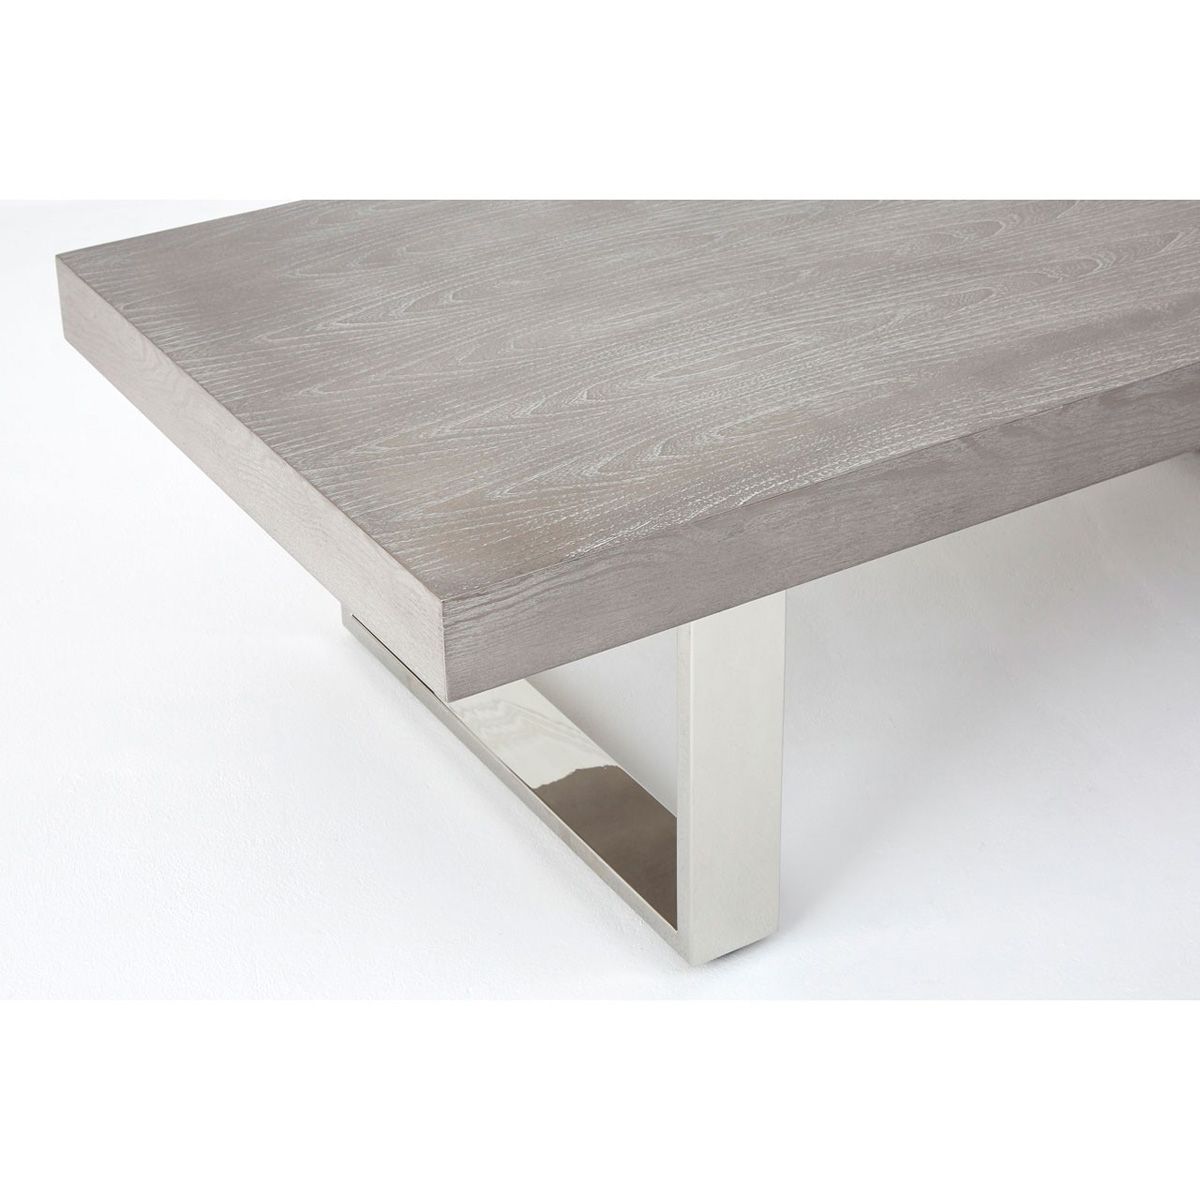 Grey Elm Wood Coffee Table – Stainless Steel Legs | Fads Intended For Smoke Gray Wood Coffee Tables (View 12 of 15)